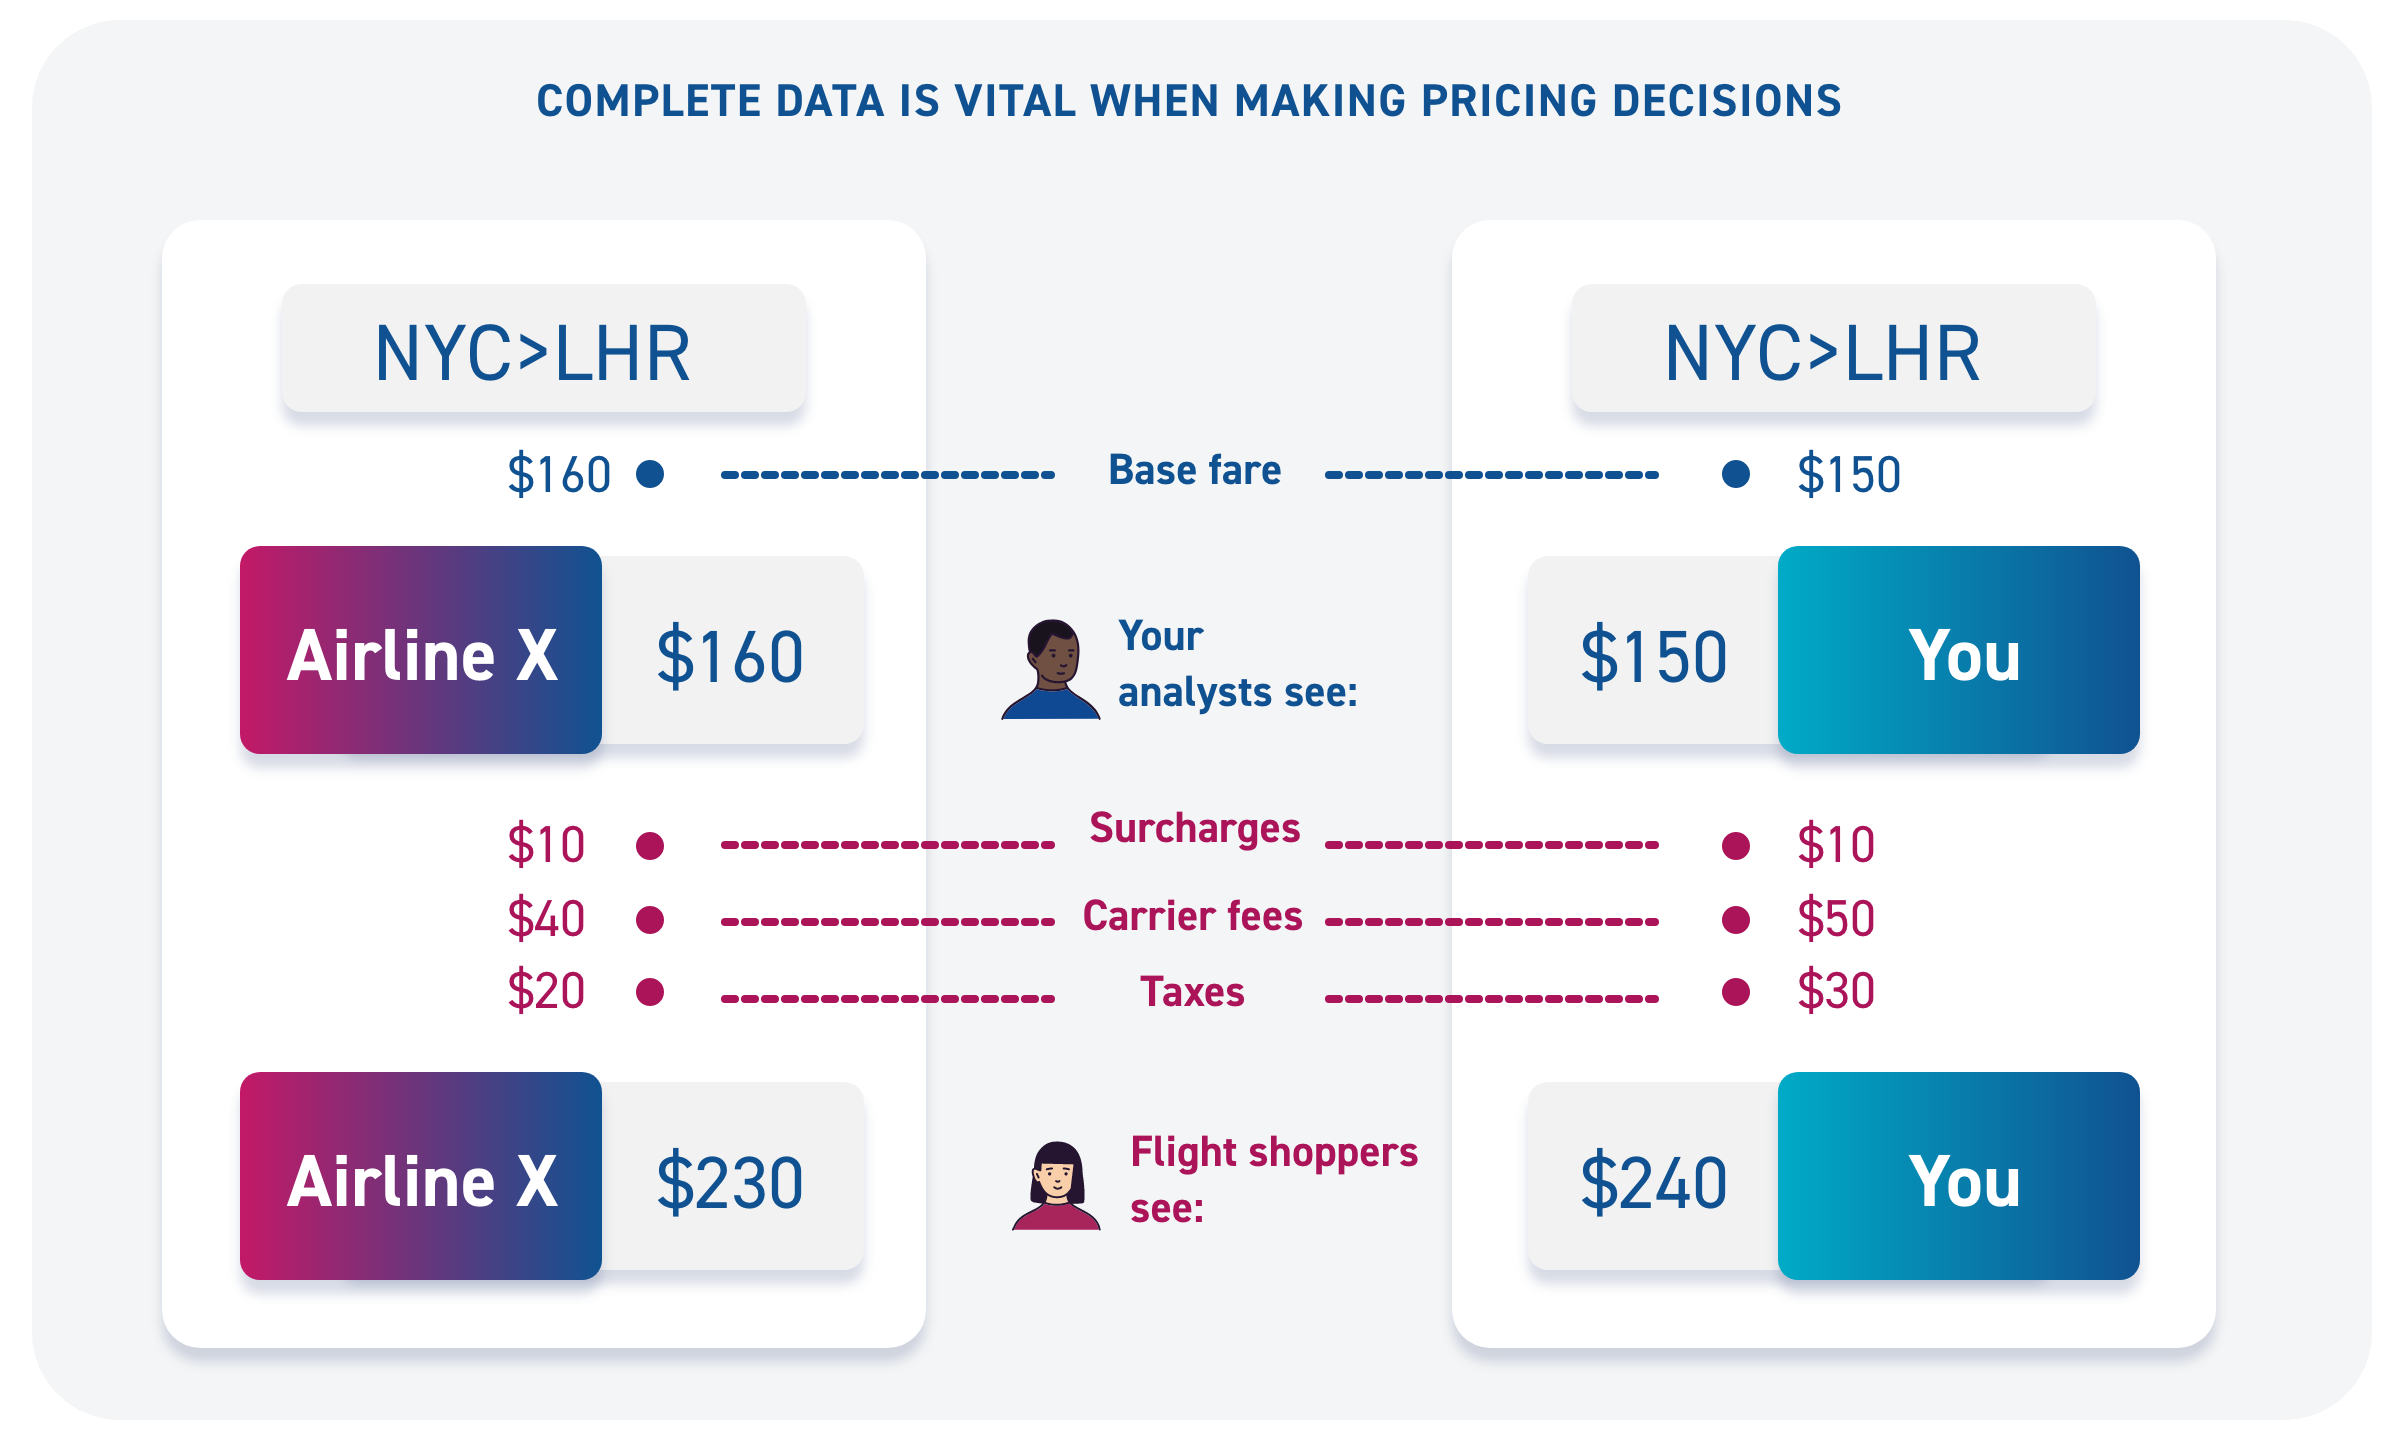 Architect: Complete data is vital when making pricing decisions